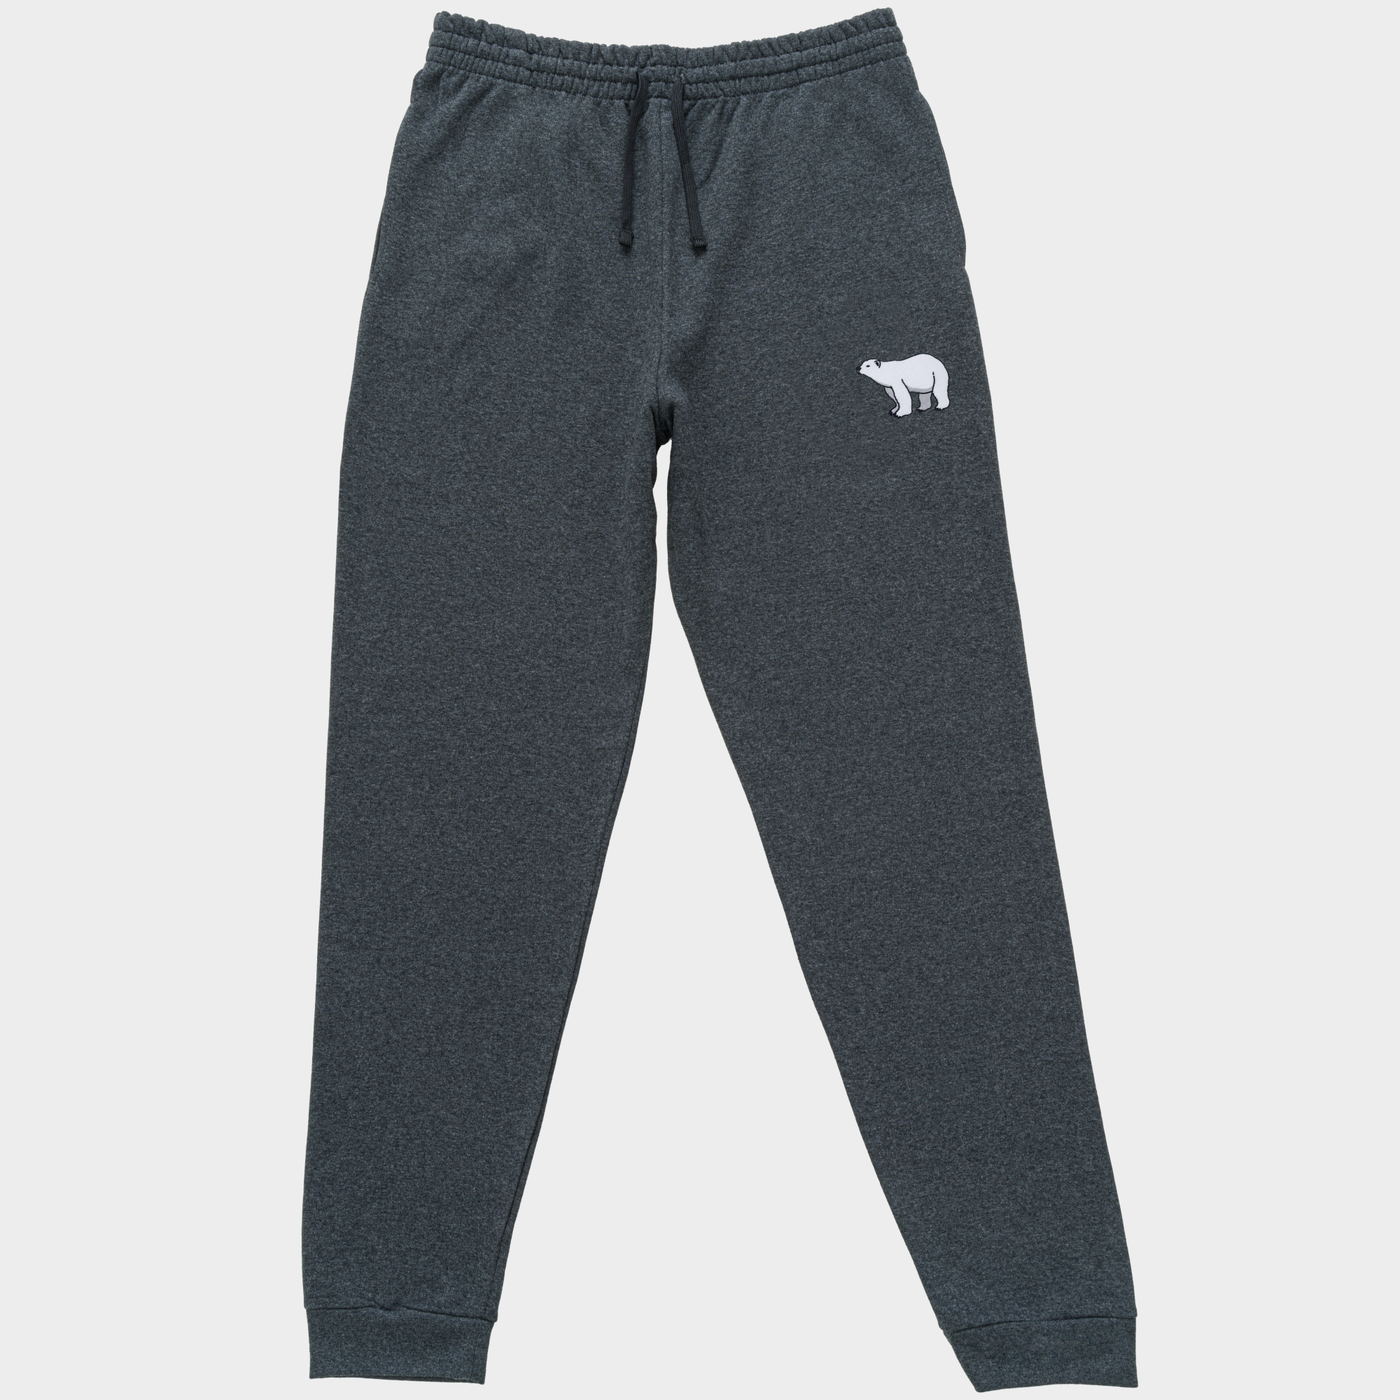 Bobby's Planet Unisex Embroidered Polar Bear Joggers from Arctic Polar Animals Collection in Black Heather Color#color_black-heather